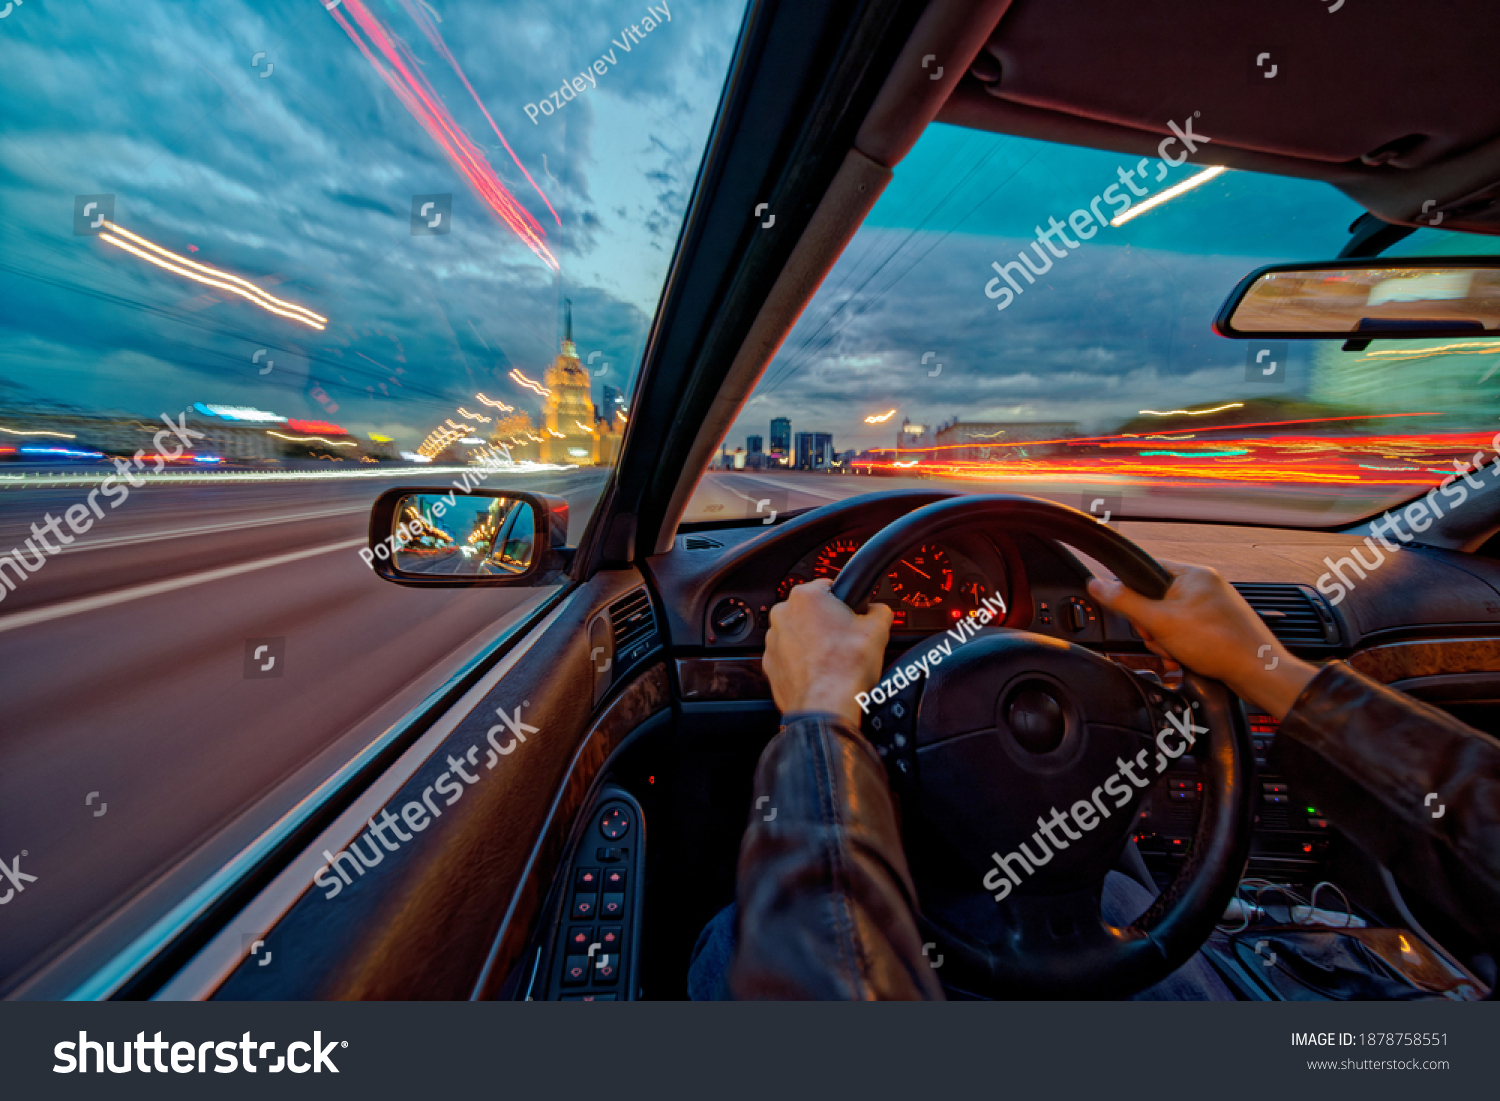 Movement of the car at night at high speed view from the interior with driver hands on wheel. Concept spped of life. Long exposure photo. #1878758551